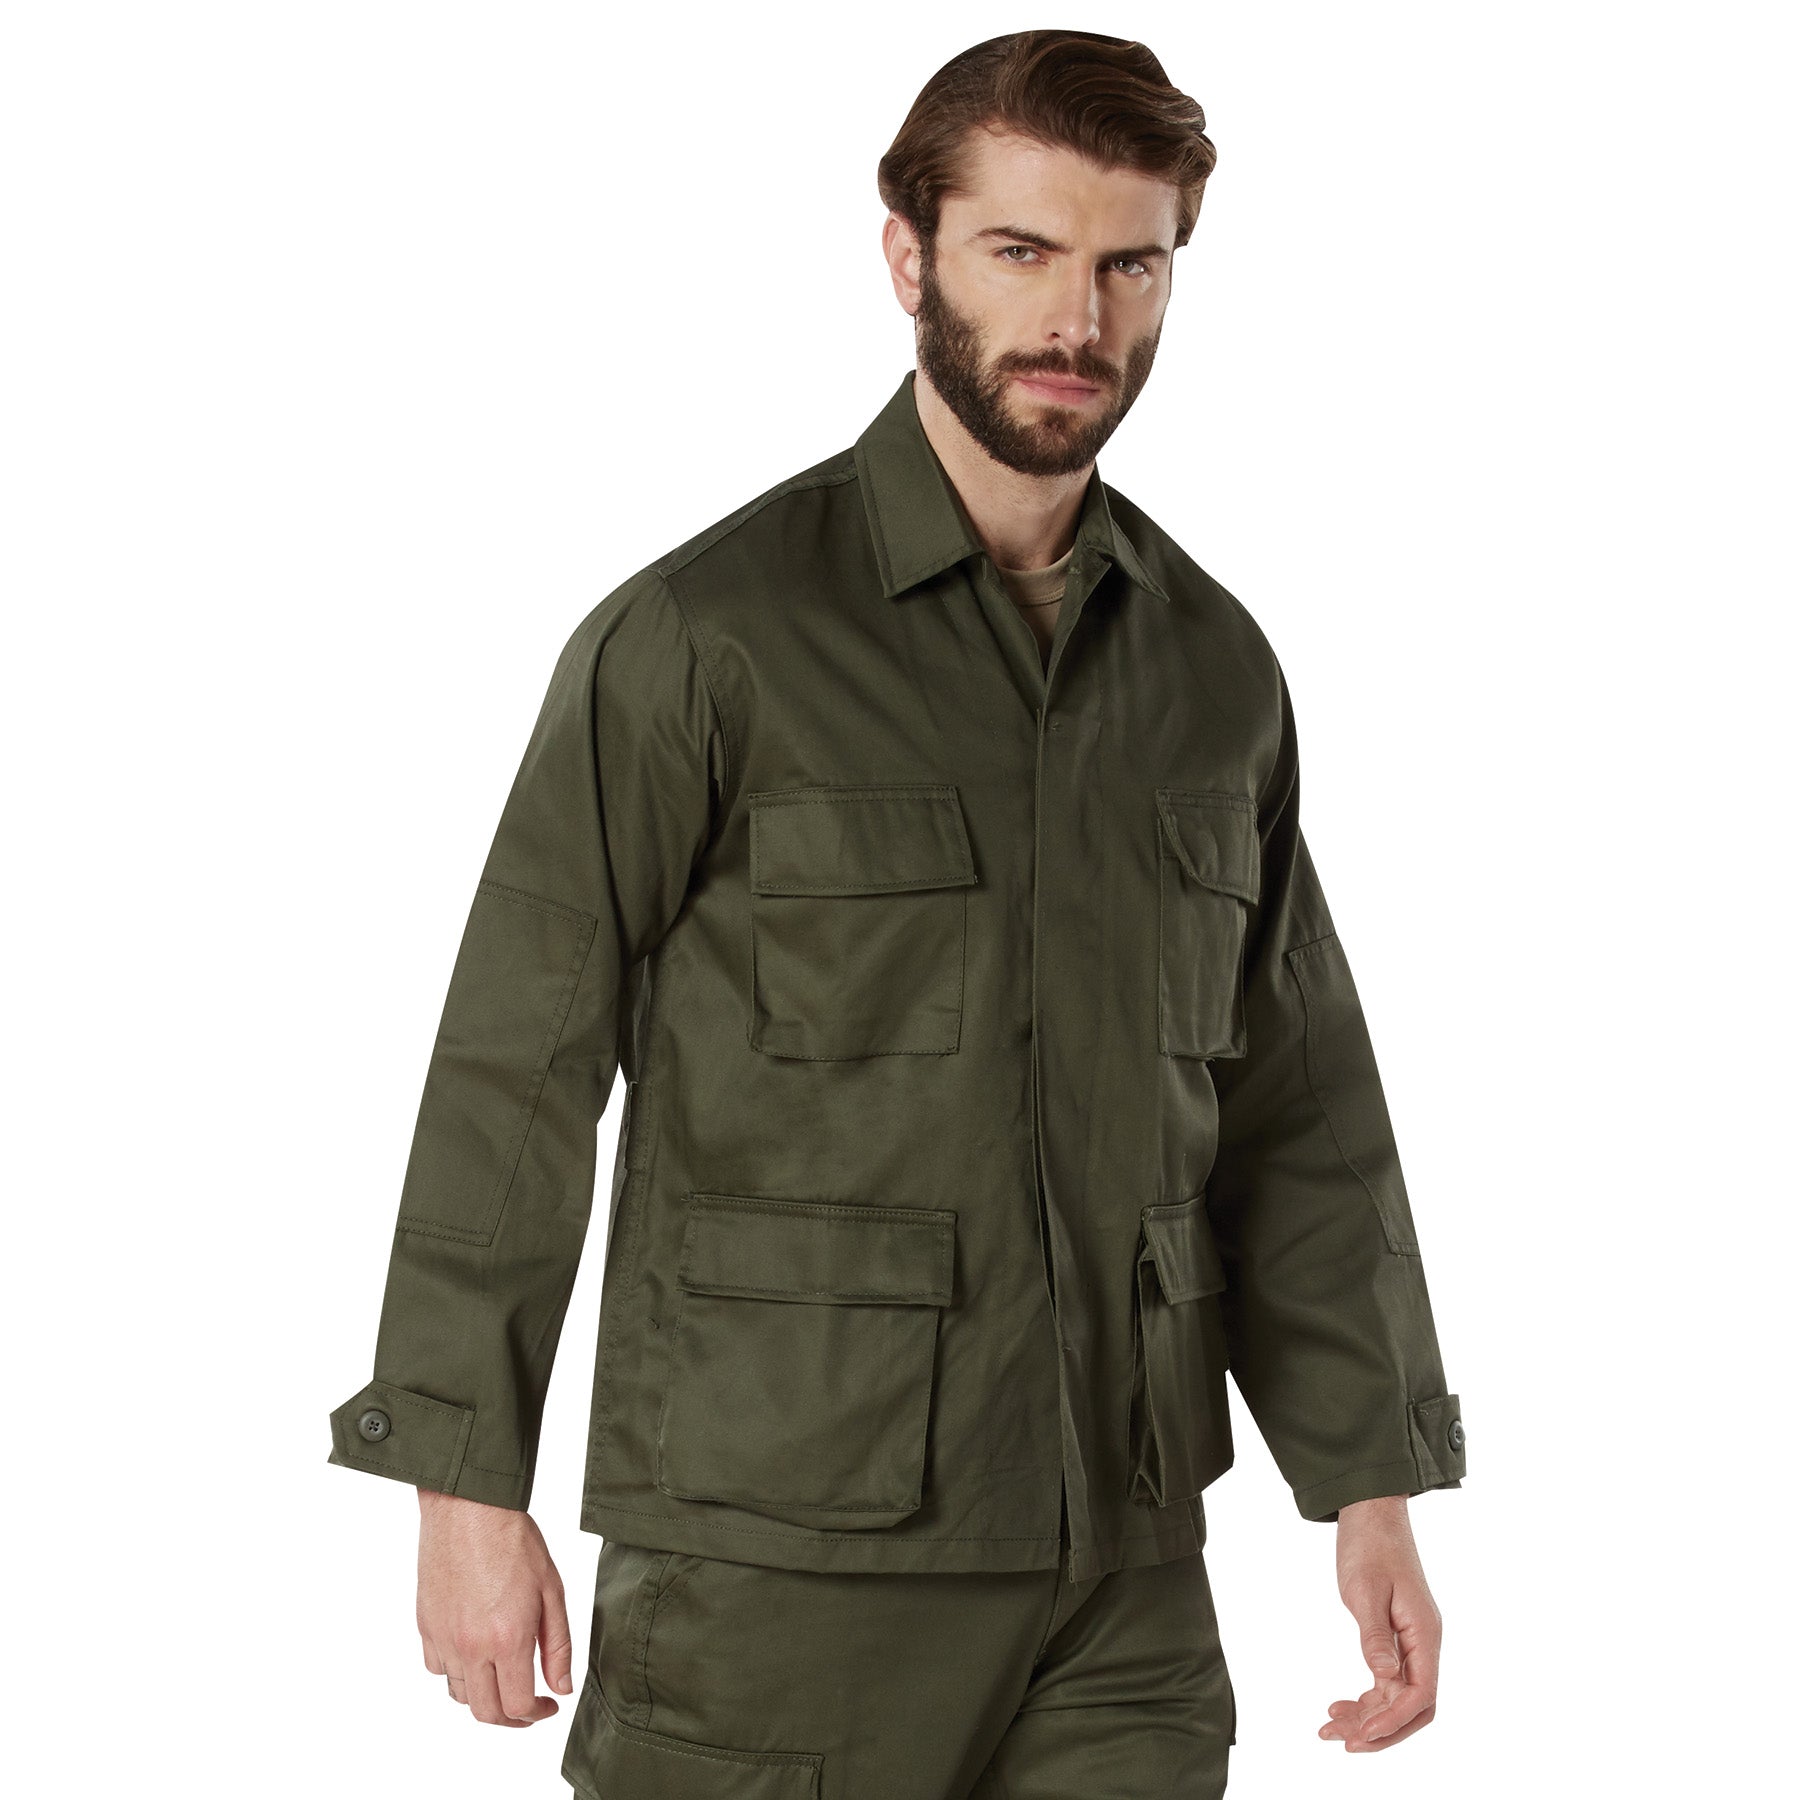 Poly/Cotton Tactical BDU Shirts Olive Drab